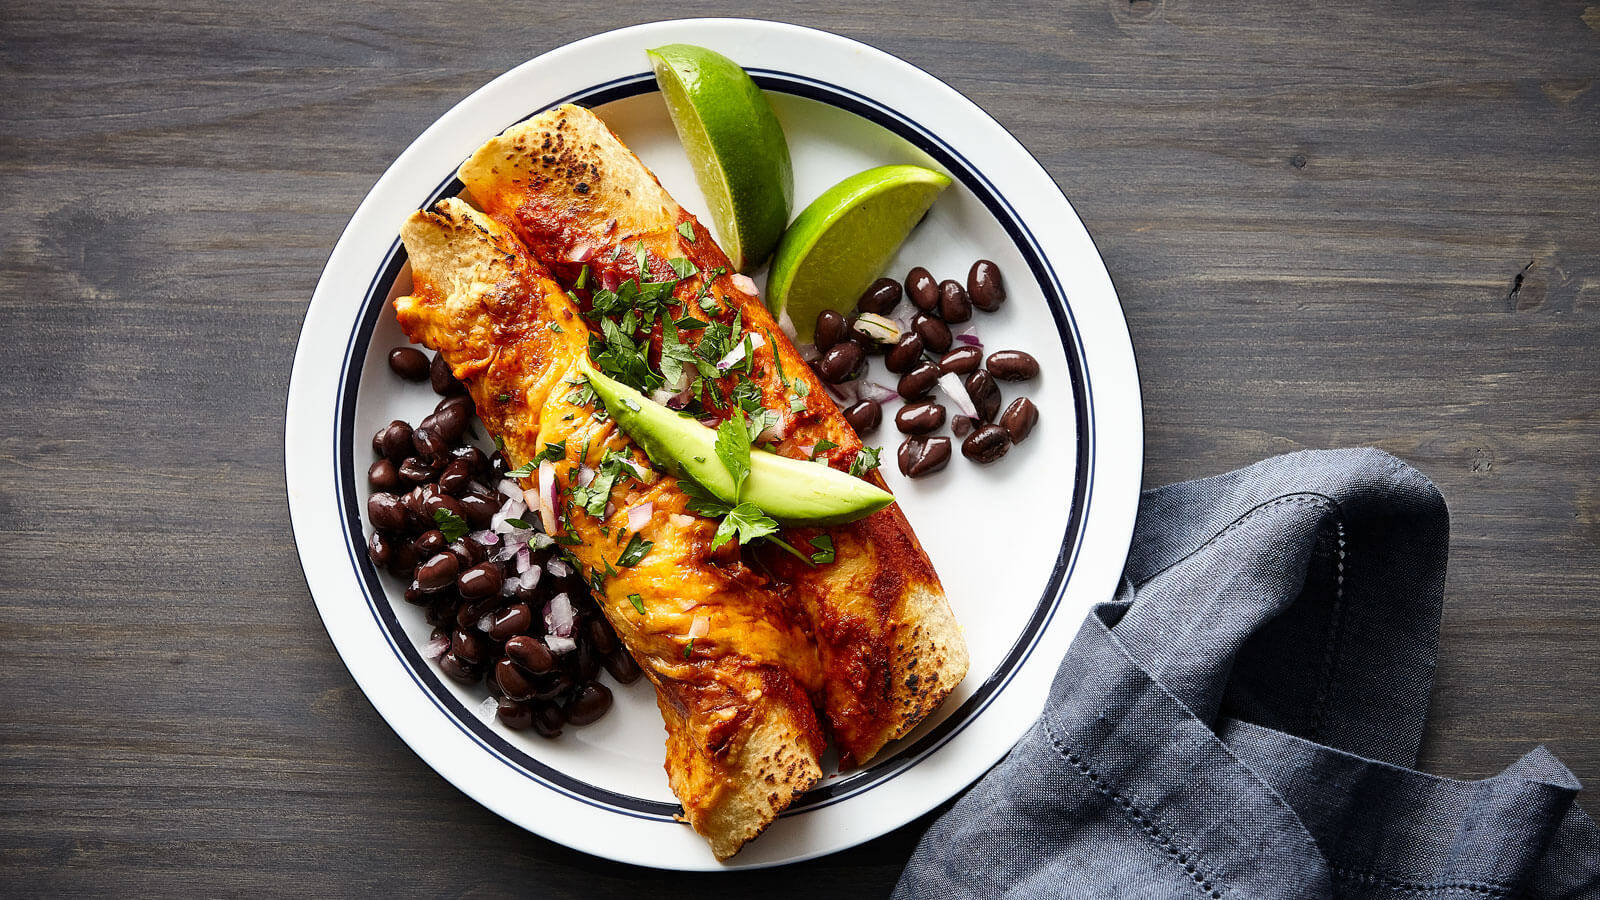 Enchiladas With Limes And Black Beans Wallpaper